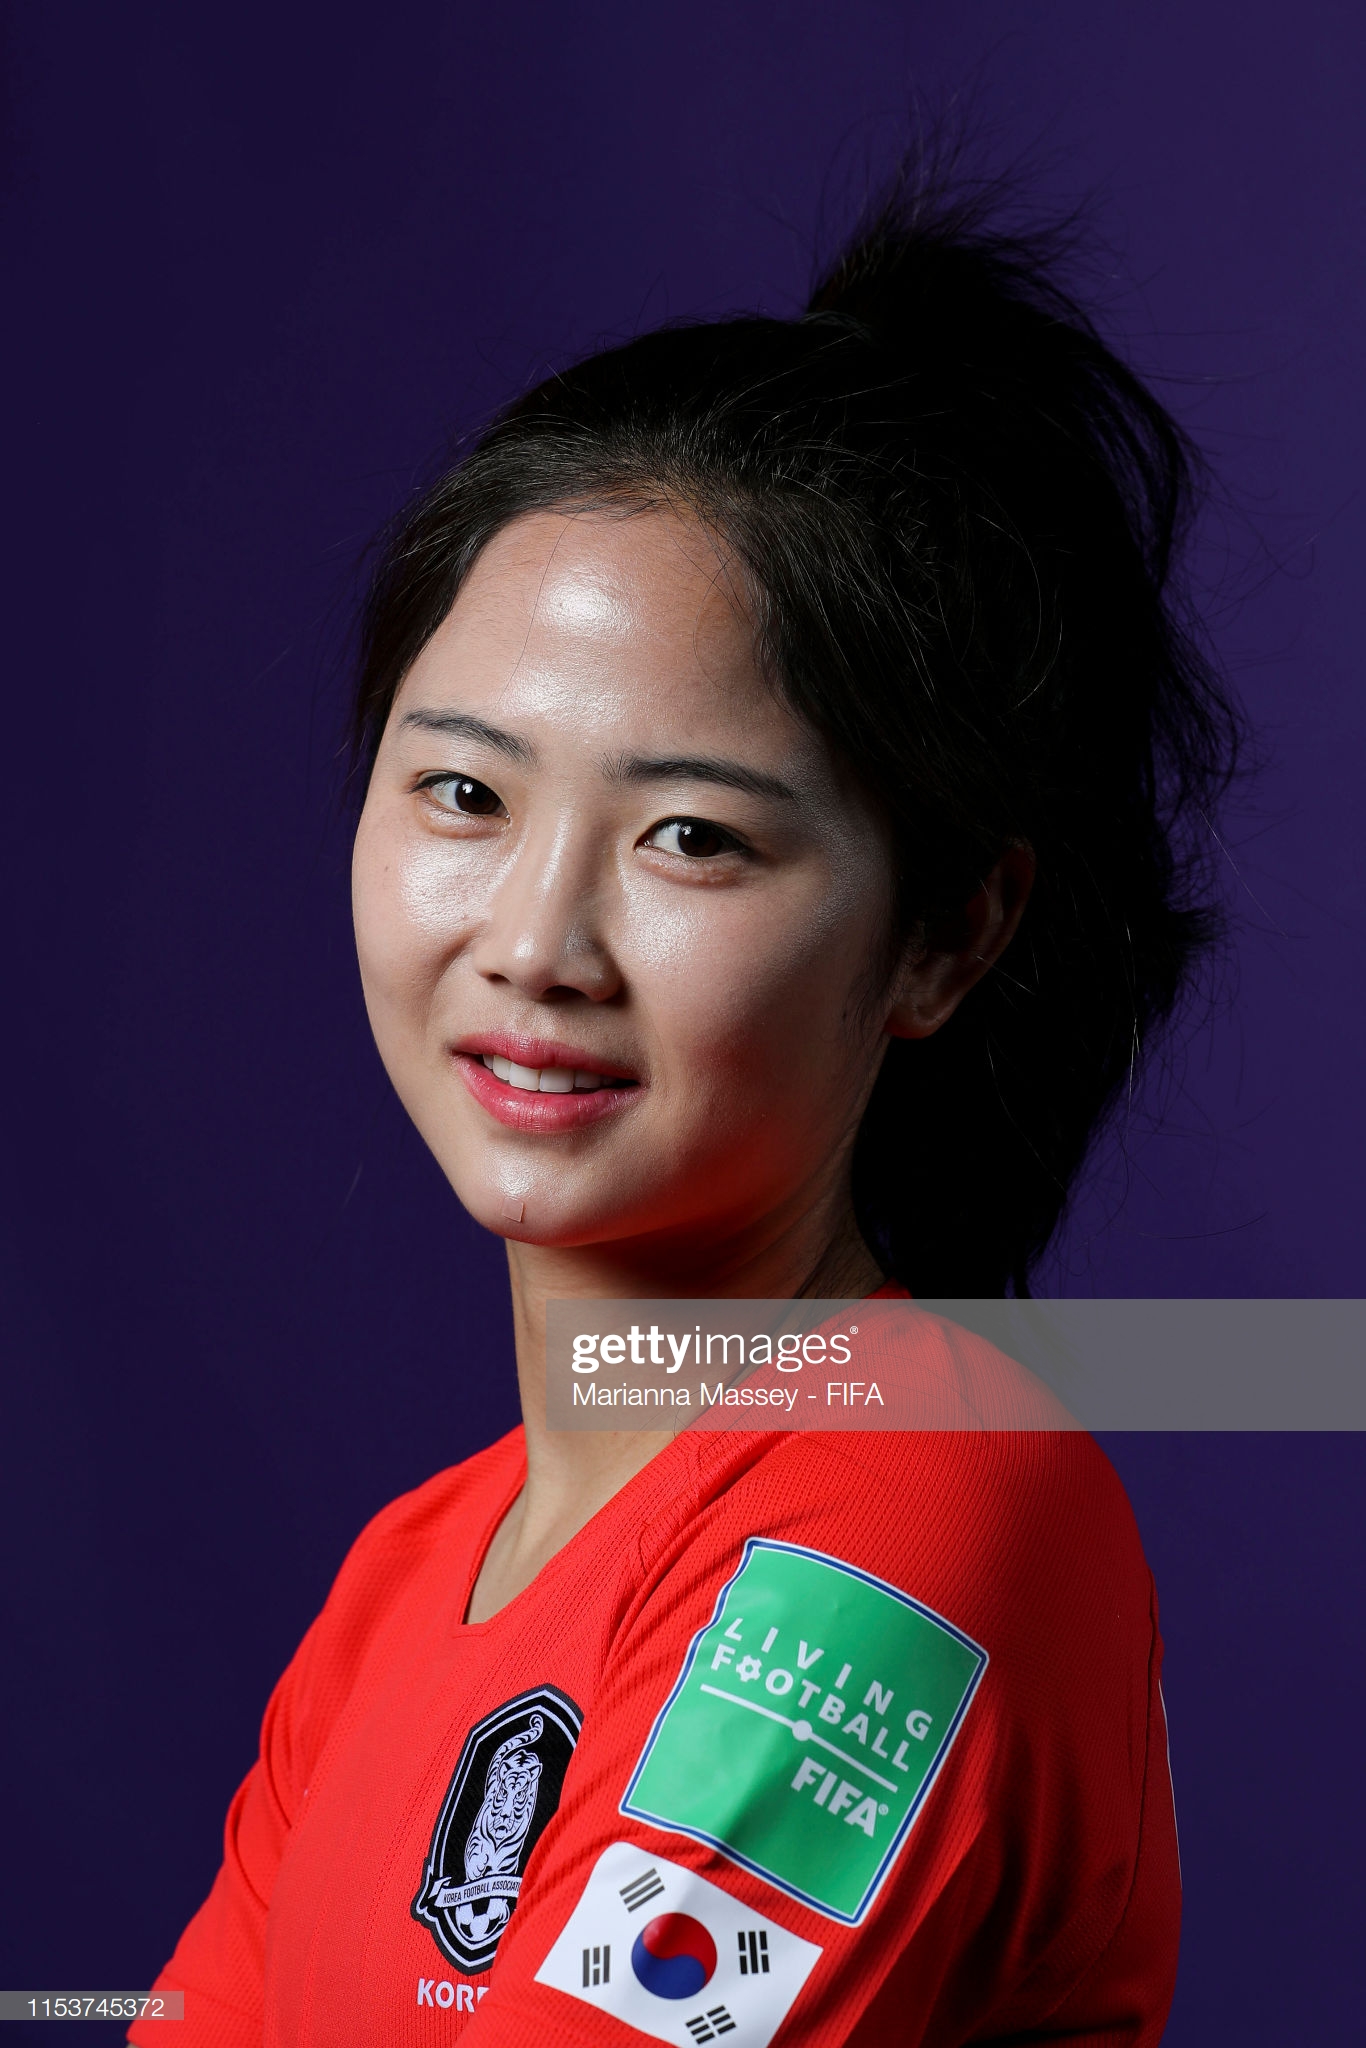 gettyimages-1153745372-2048x2048.jpg